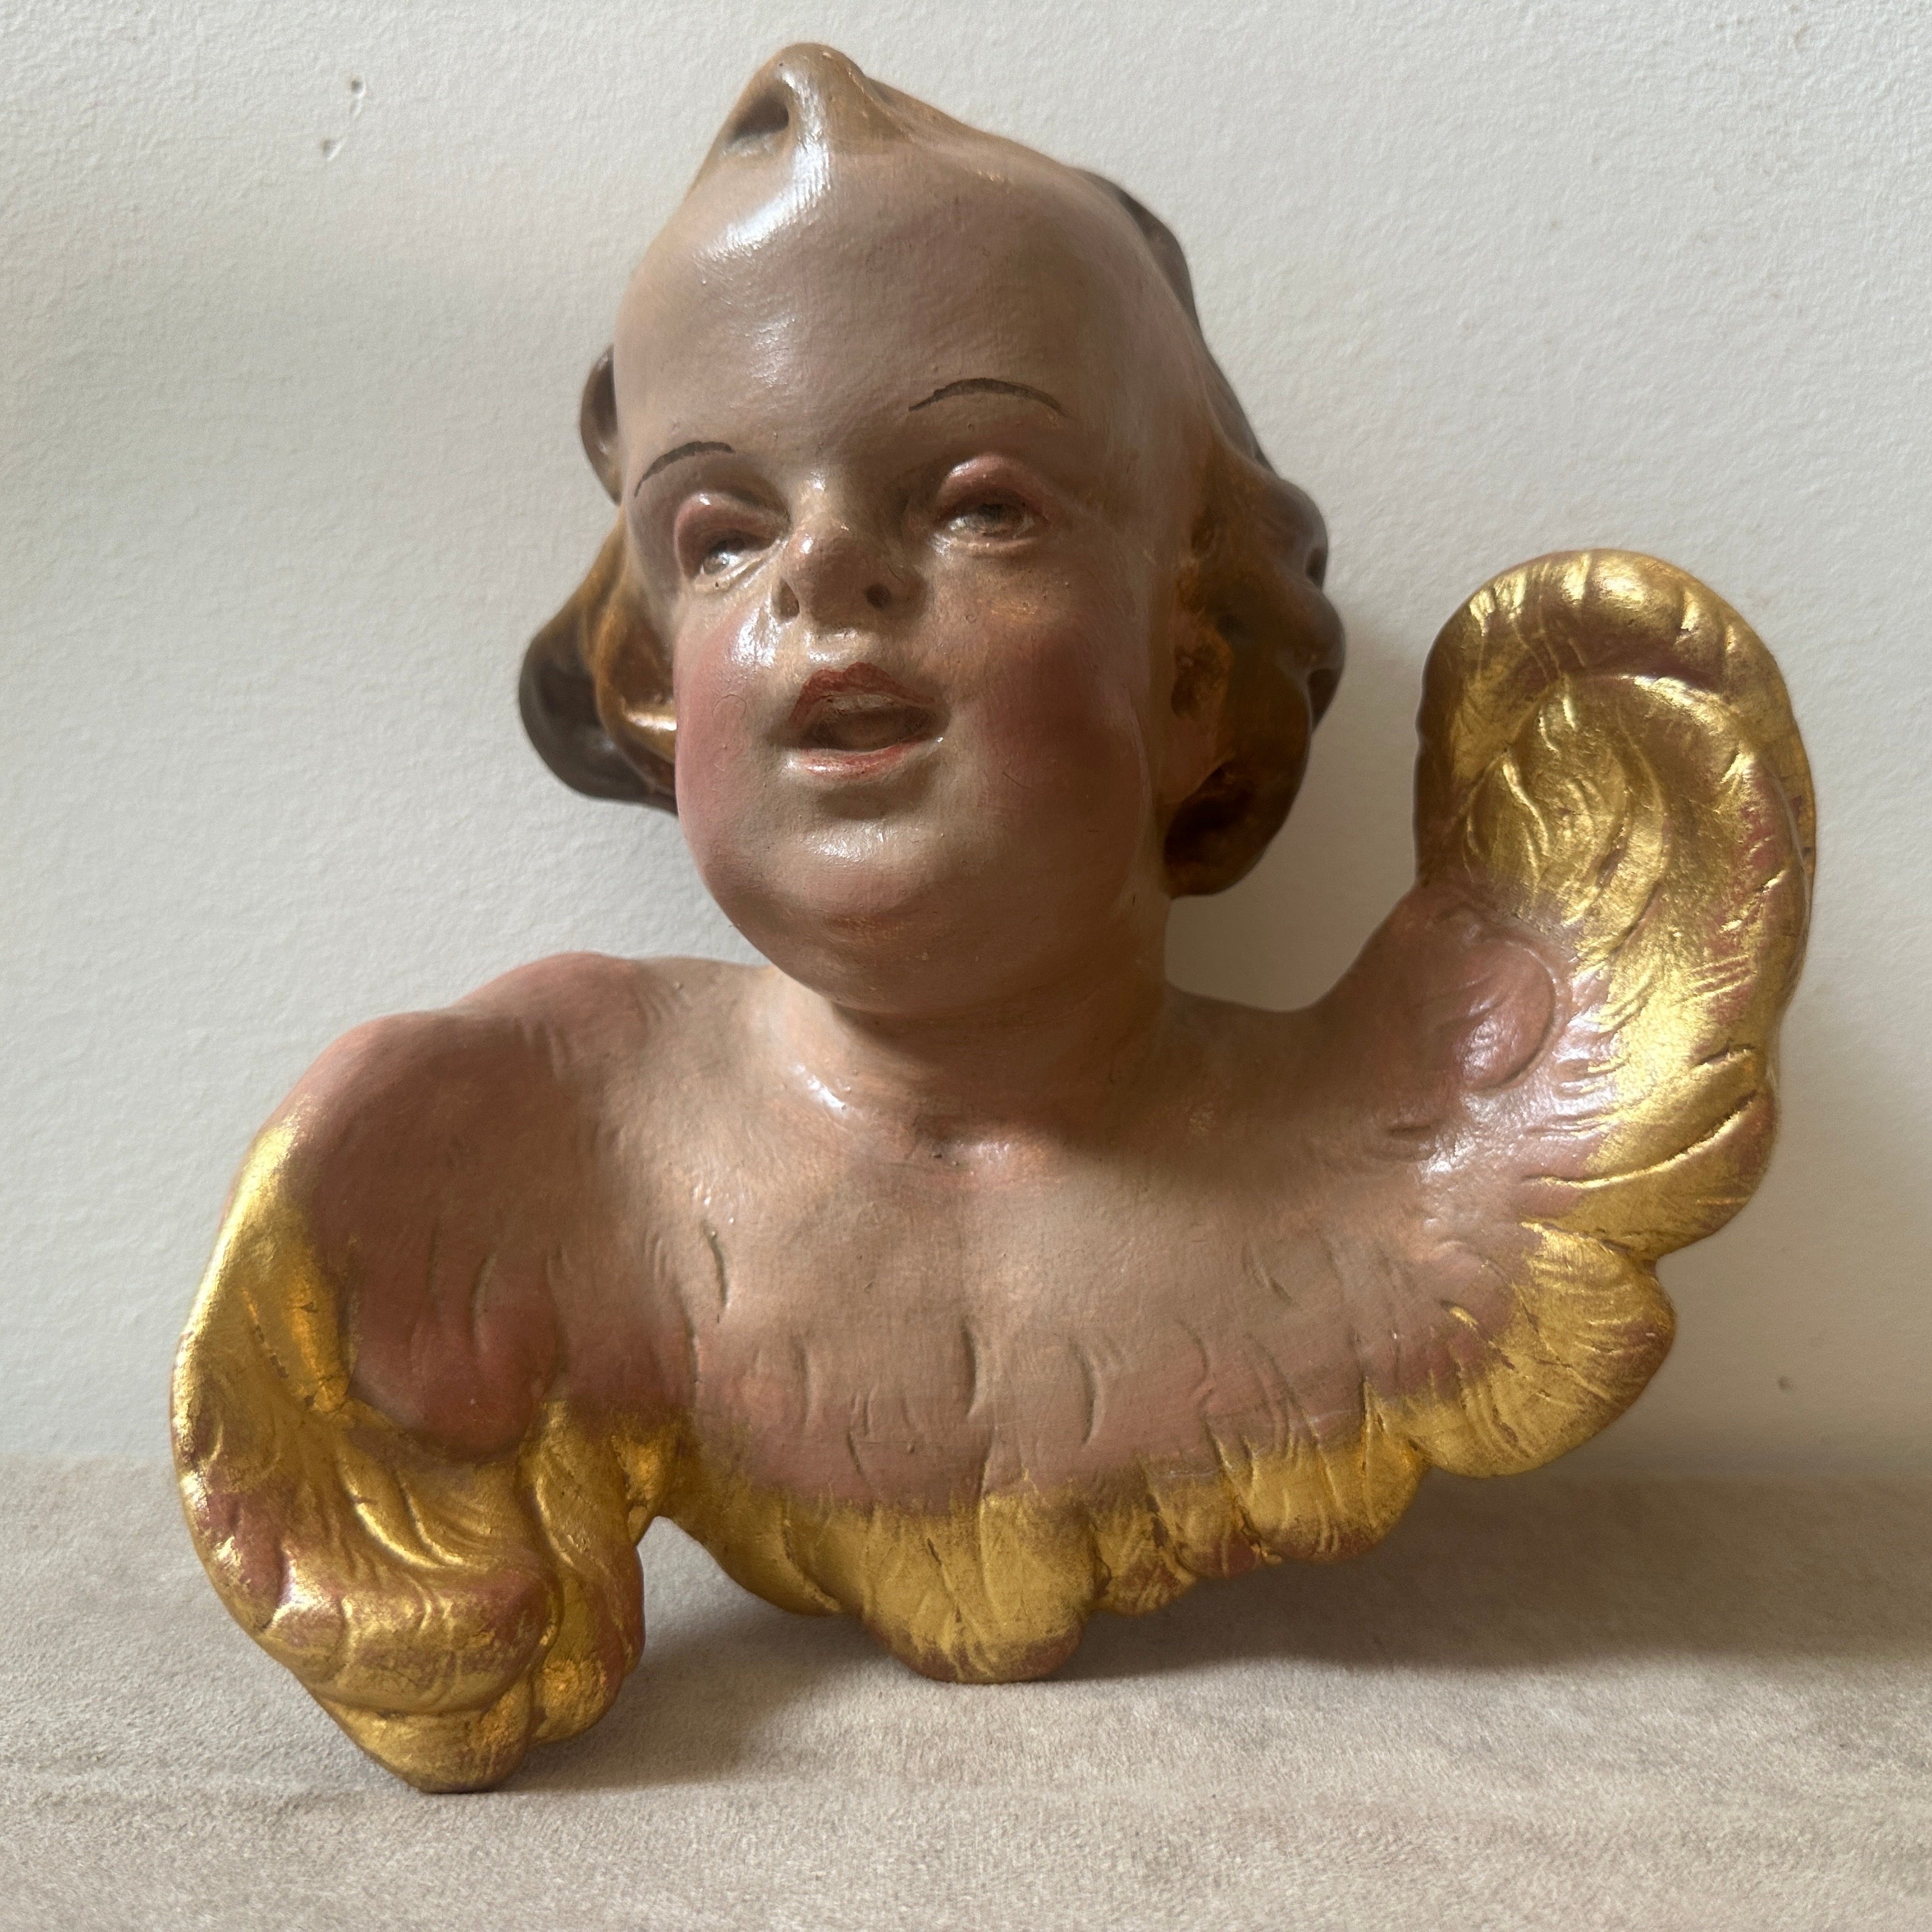 This ceramic angel is a captivating piece of art, reflecting the ornate and dramatic characteristics typical of the Baroque period. The piece exudes a sense of opulence and drama, characteristic of the Baroque style that flourished in the 17th